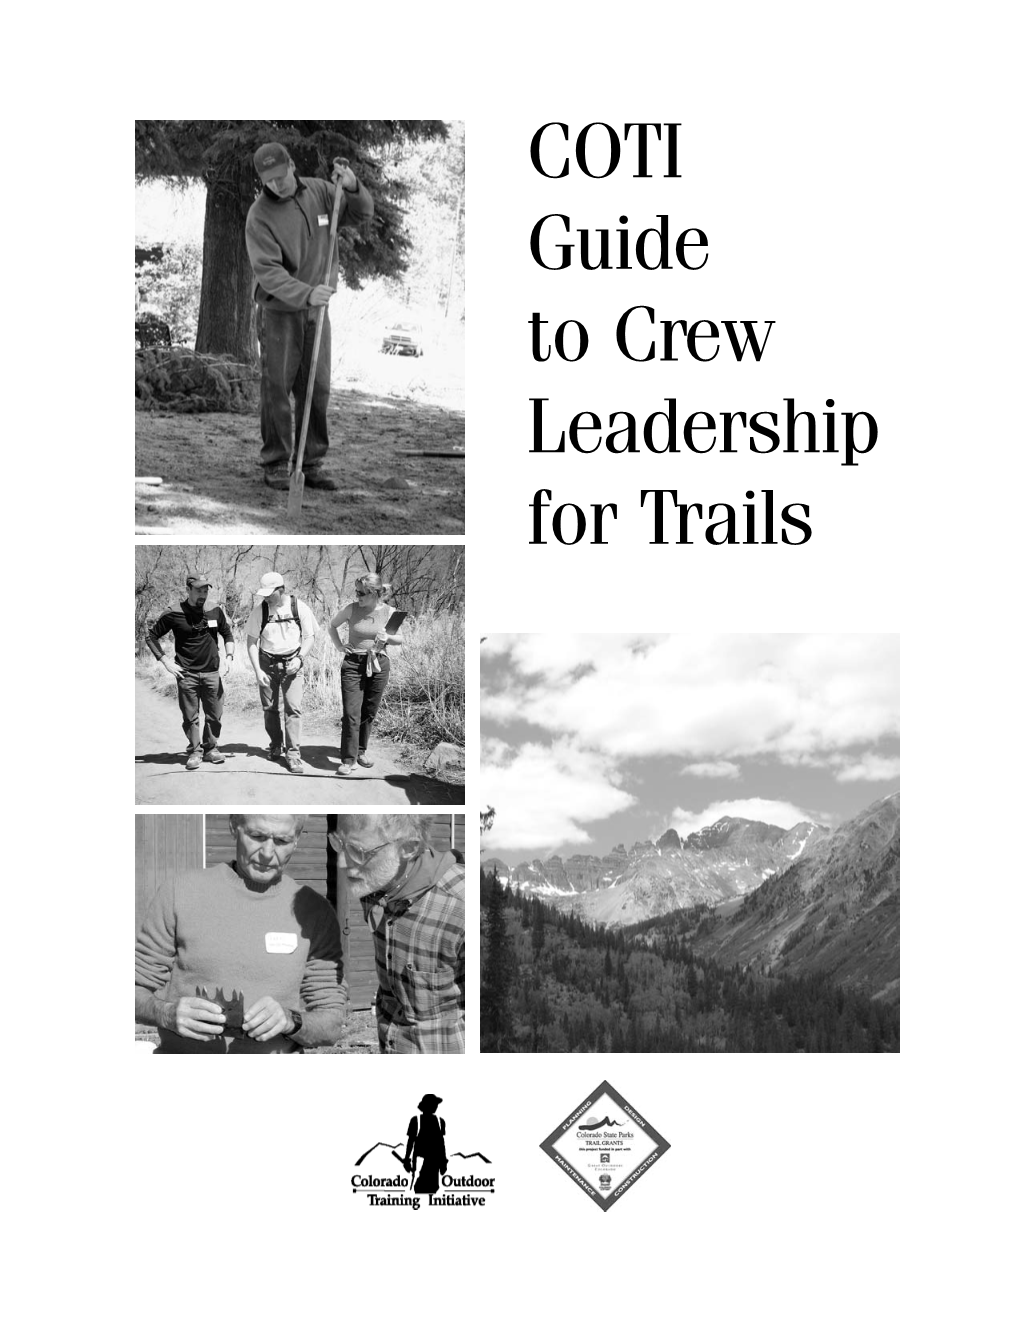 COTI Guide to Crew Leadership for Trails